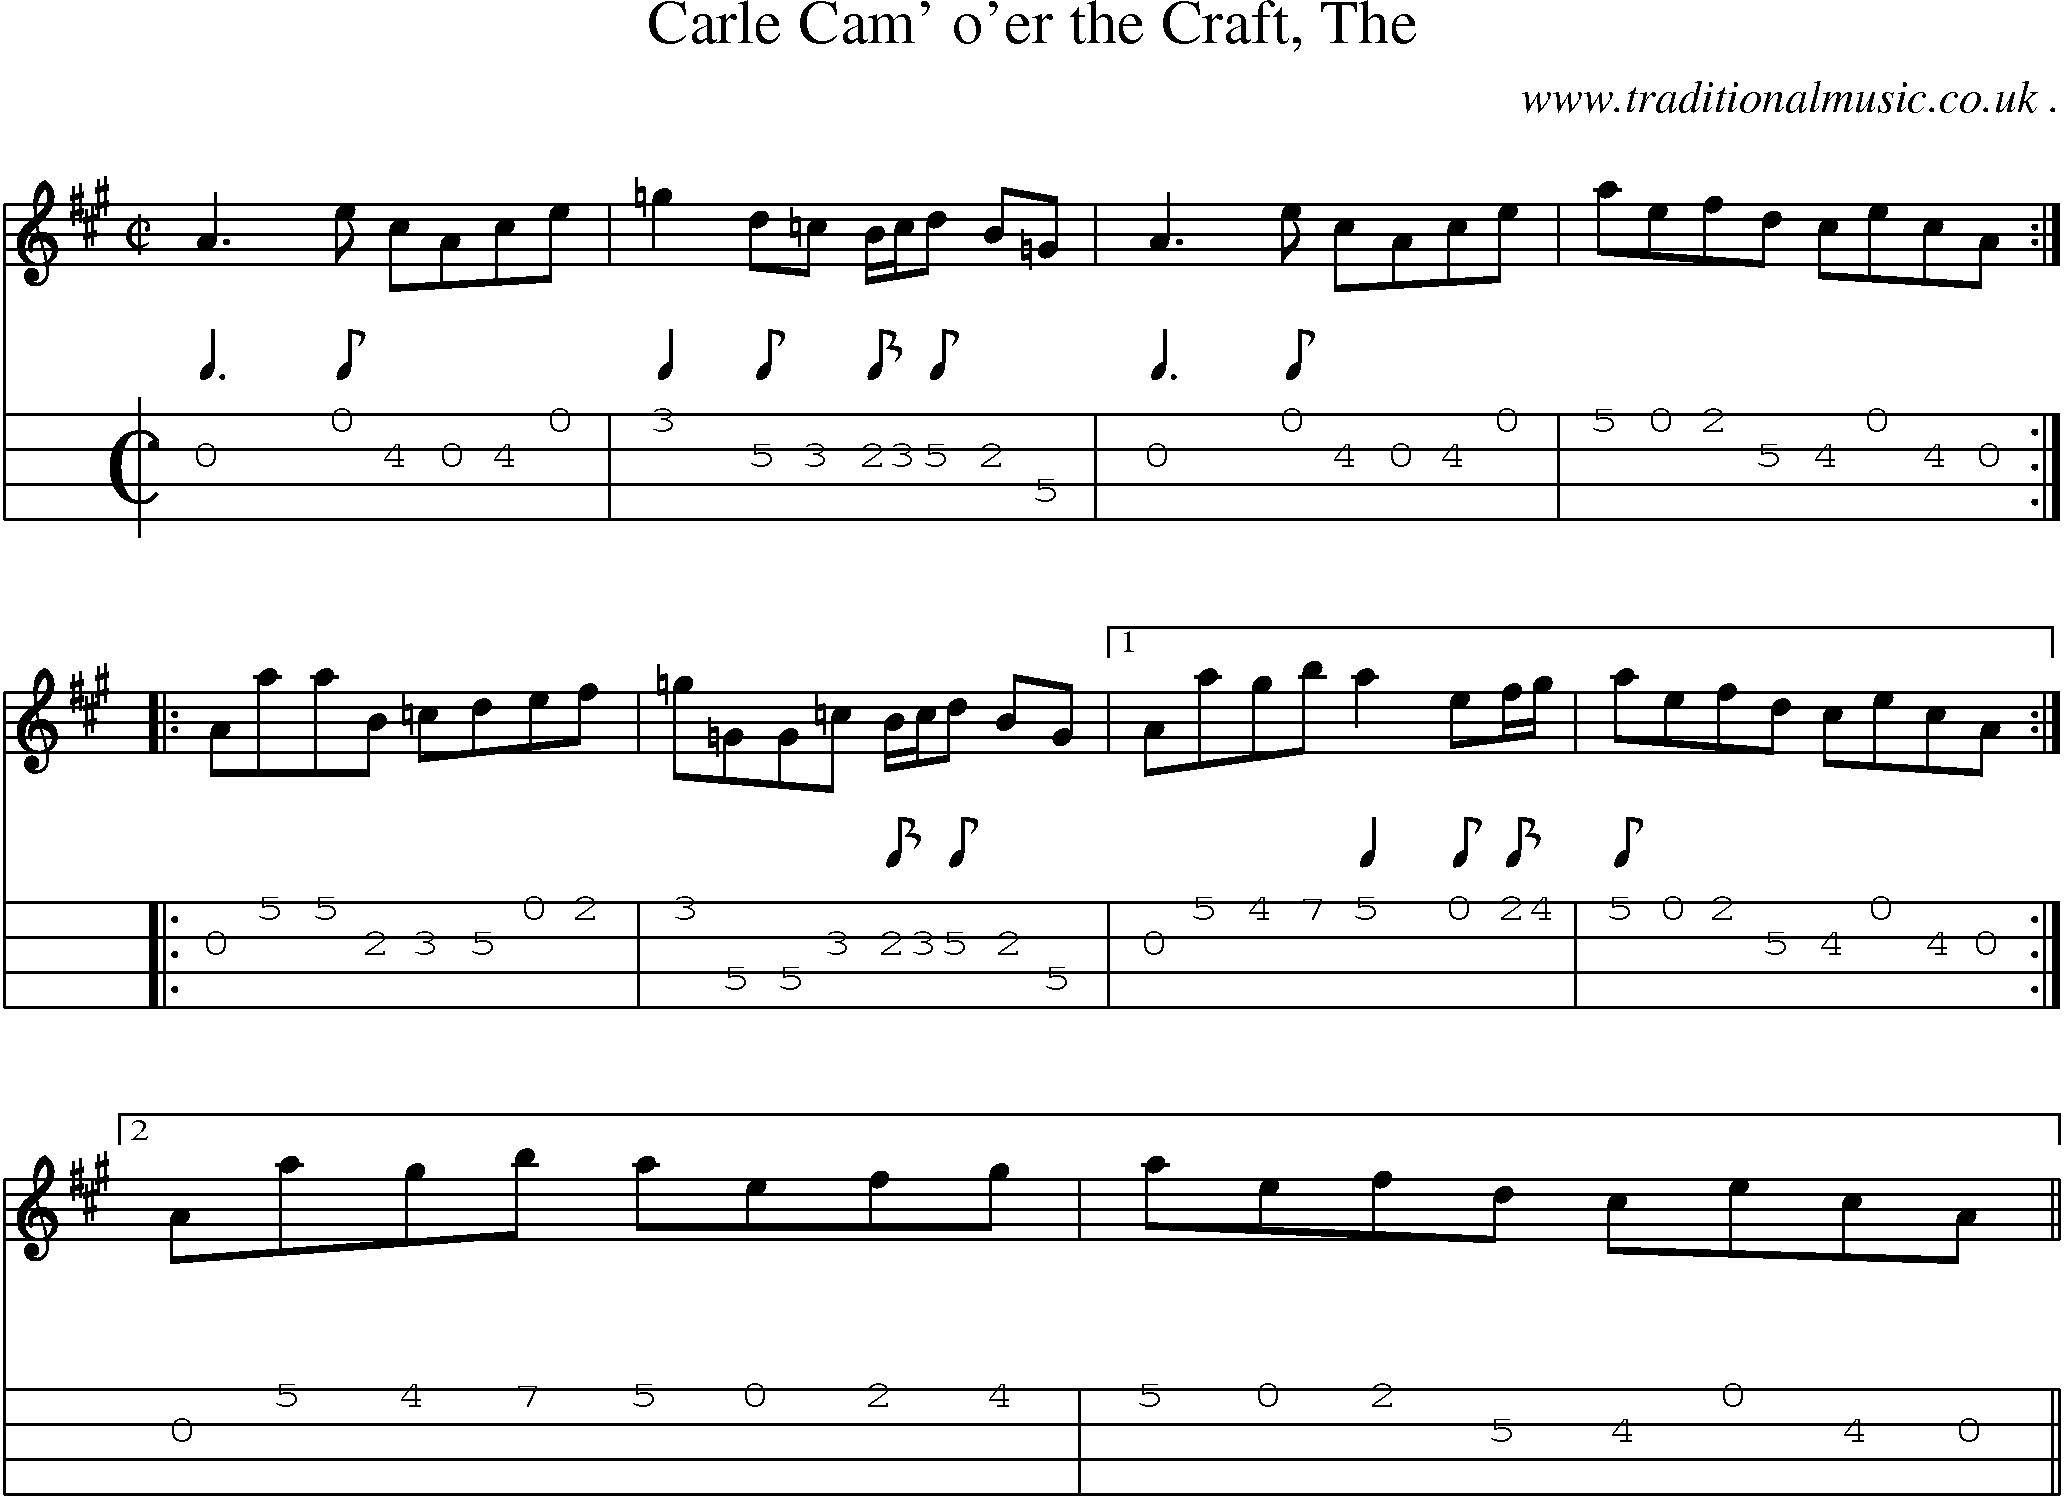 Sheet-music  score, Chords and Mandolin Tabs for Carle Cam Oer The Craft The